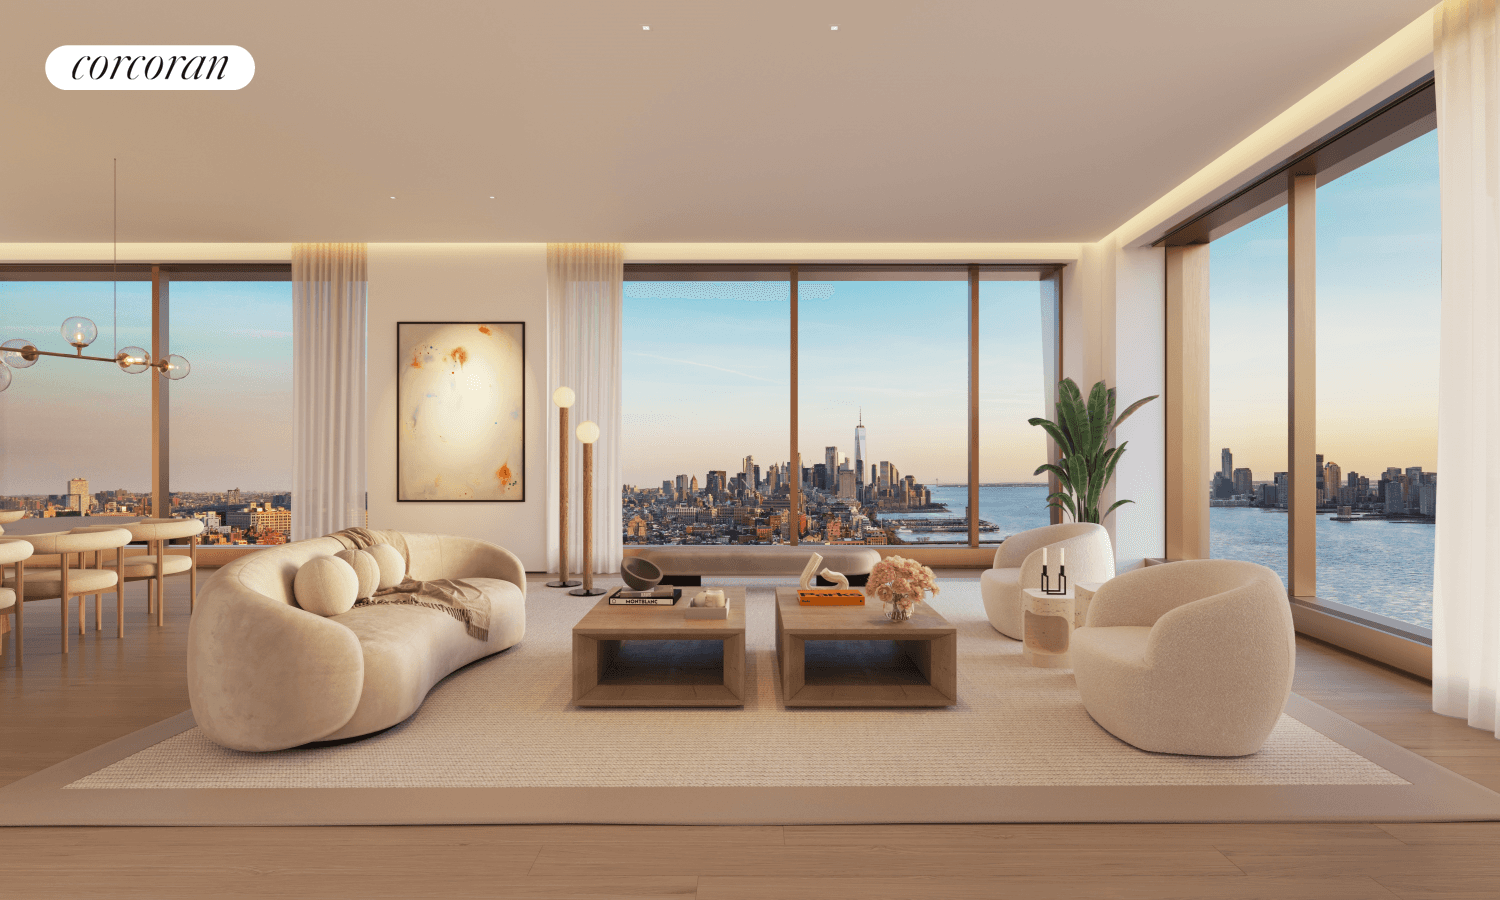 West 25D is an exquisite 3, 839 SF four bedroom and four and a half bathroom corner residence curated by Gabellini Sheppard Associates with north and east and south exposures.